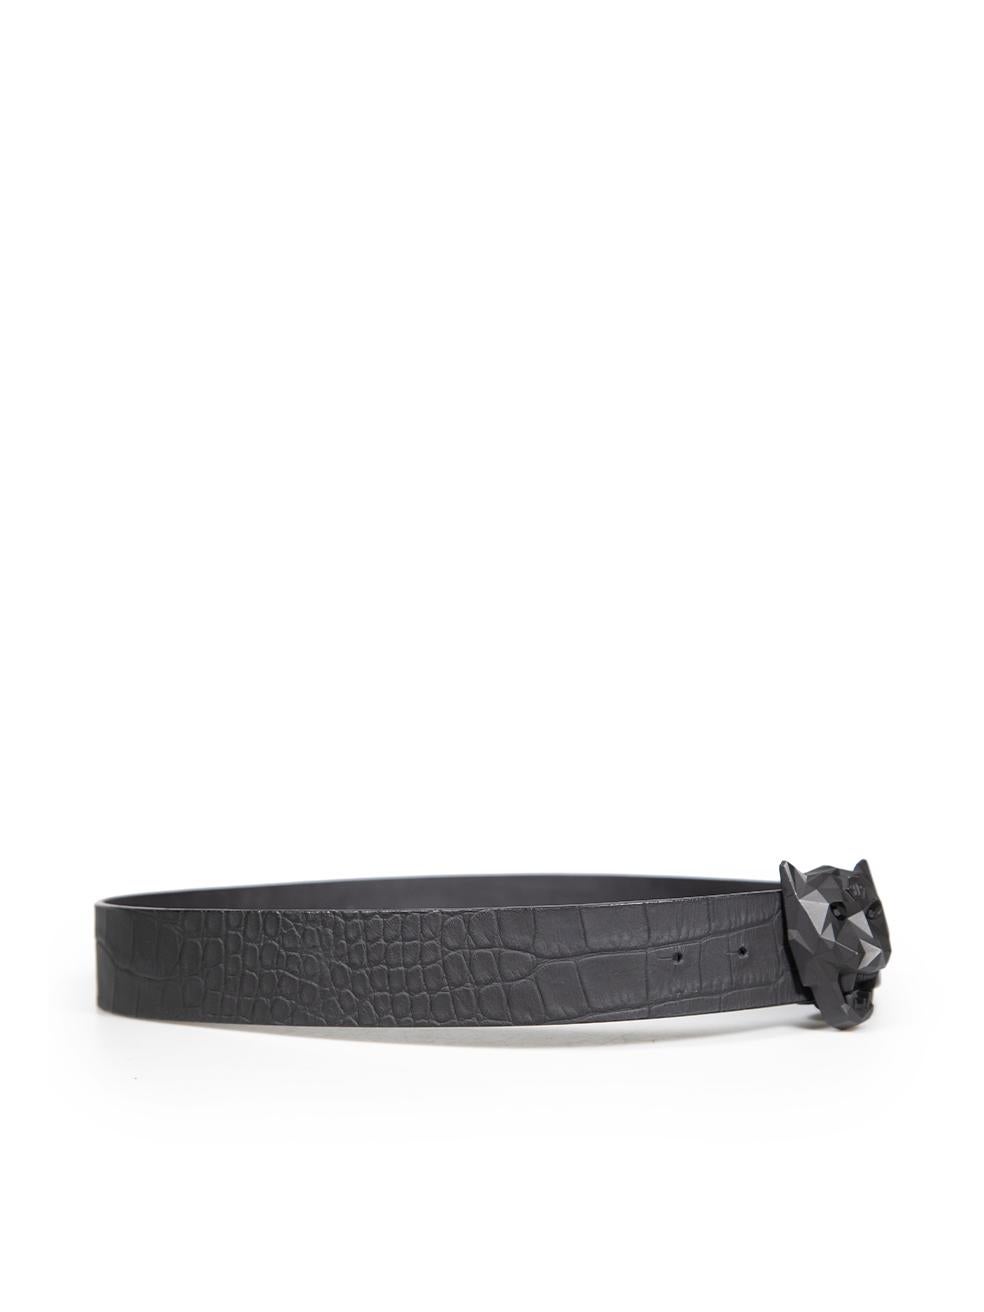 CONDITION is Very good. Minimal wear to belt is evident. Minimal wear to the belt buckle with chips to the paint on this used Philipp Plein designer resale item.
 
 
 
 Details
 
 
 Black
 
 Leather
 
 Waist belt
 
 Crocodile embossed pattern
 
